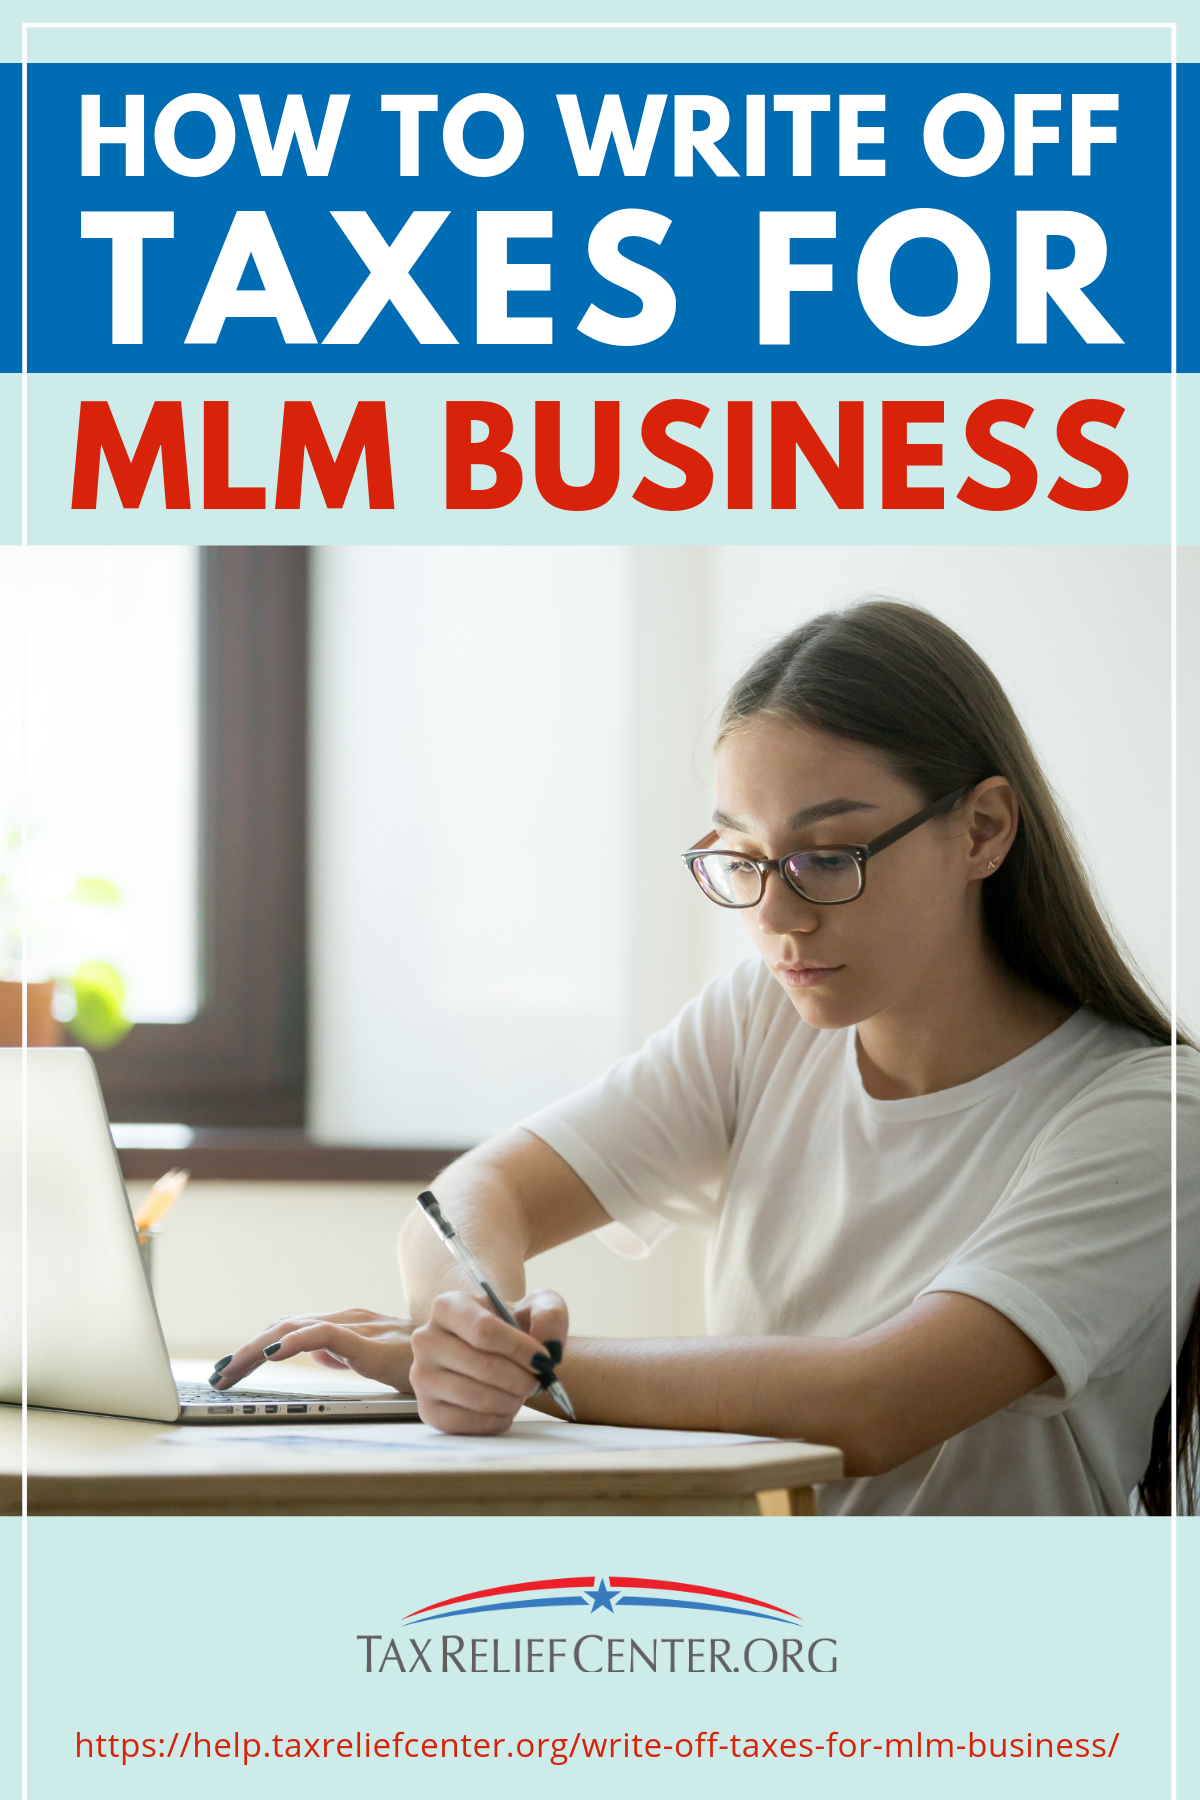 How To Write Off Taxes For MLM Business